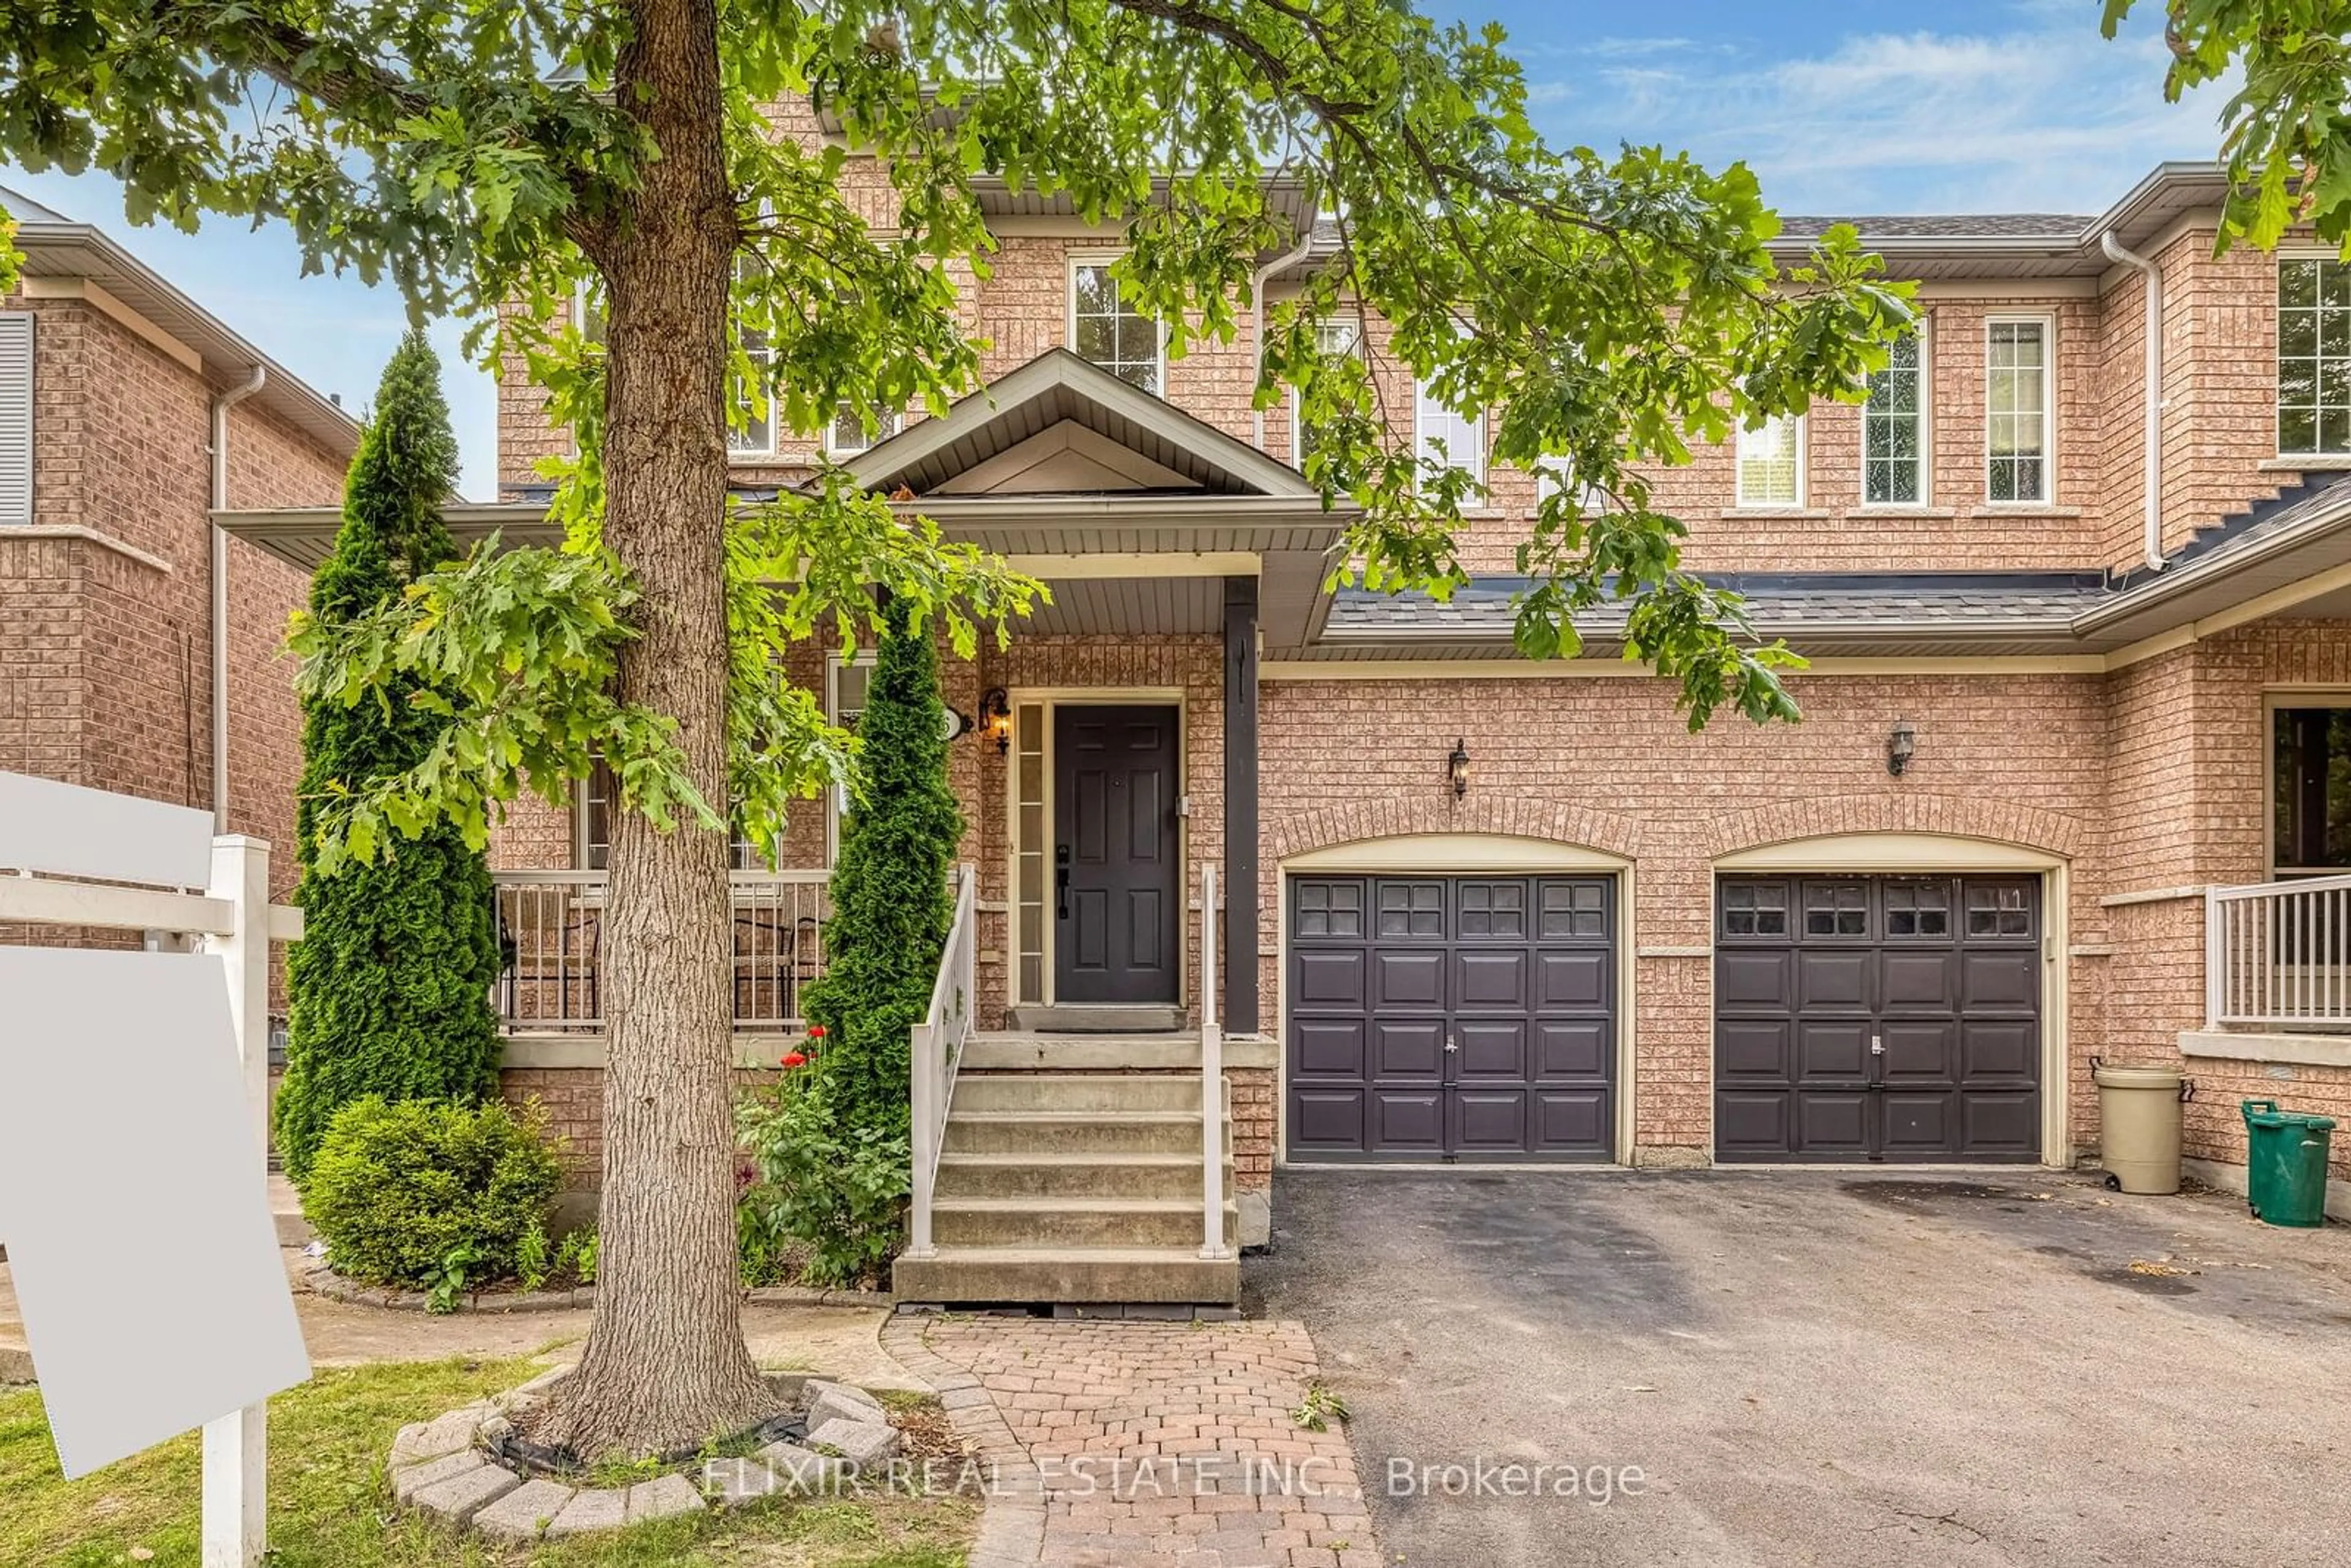 Home with brick exterior material for 36 Montreaux Cres, Vaughan Ontario L4H 2X9